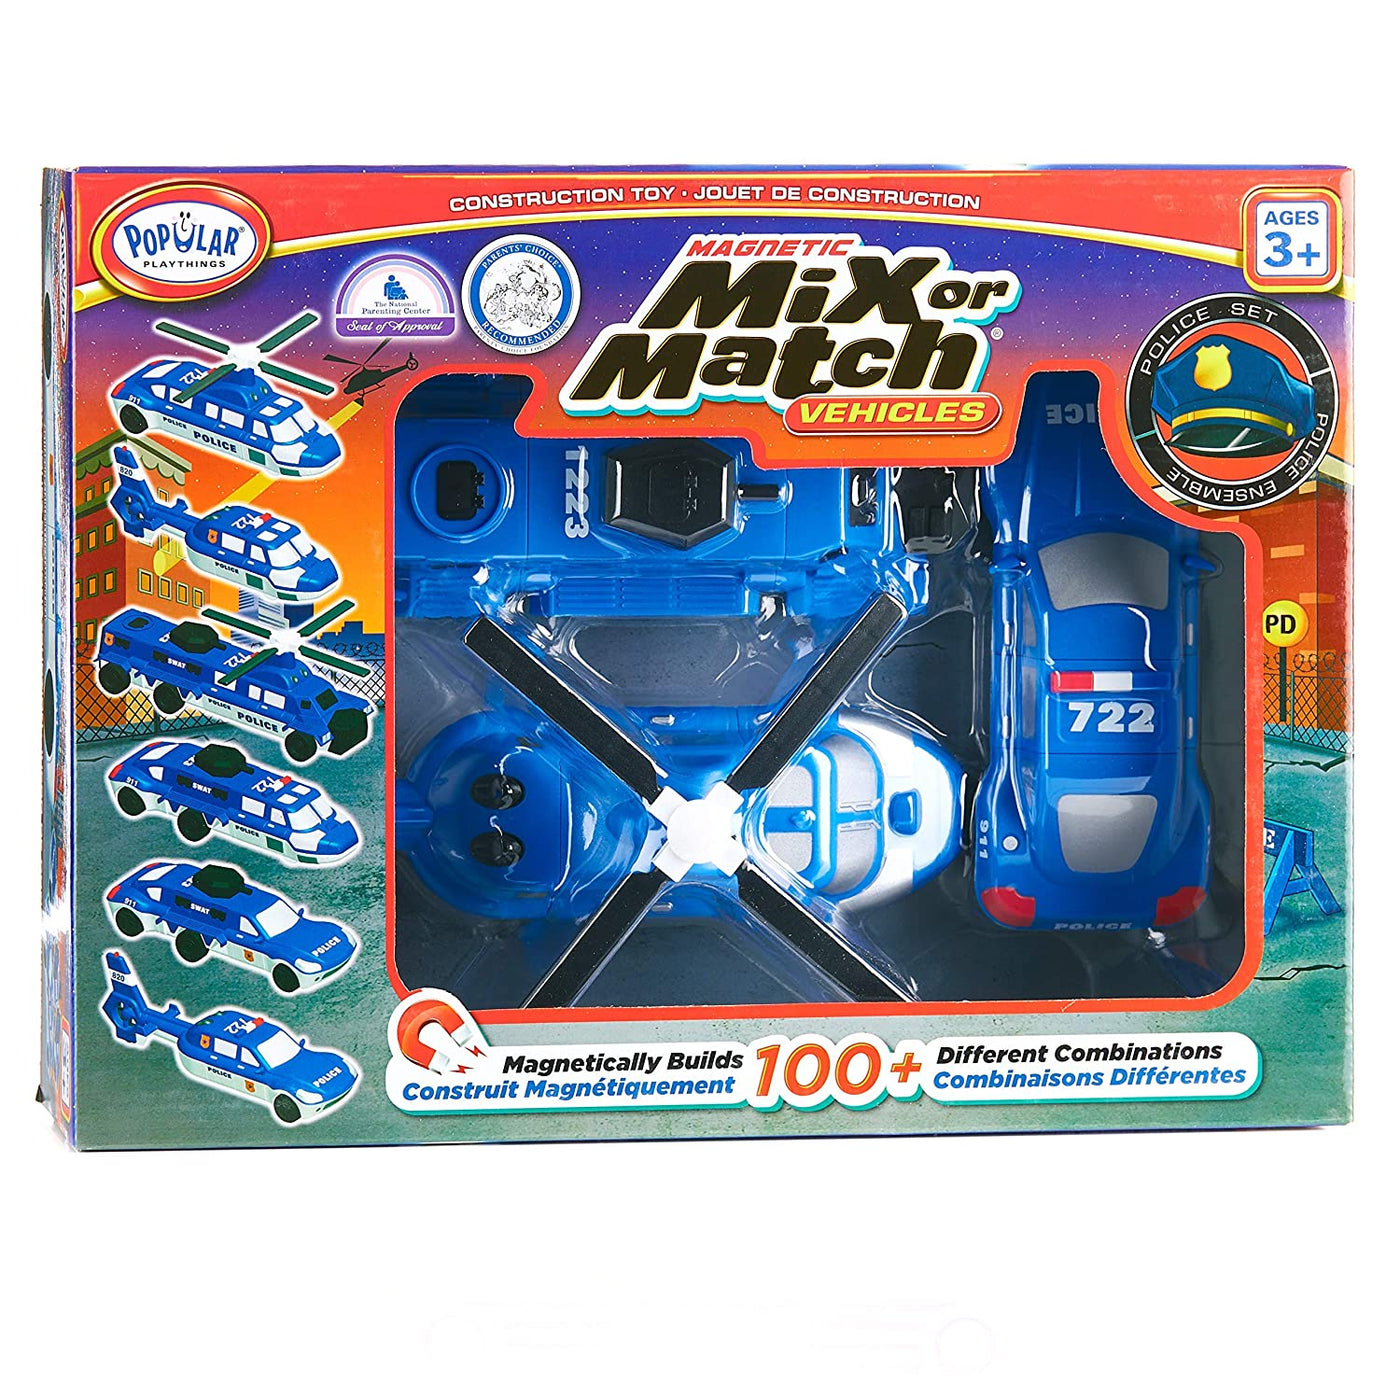 Mix or Match Vehicles Police Set | Popular Playthings